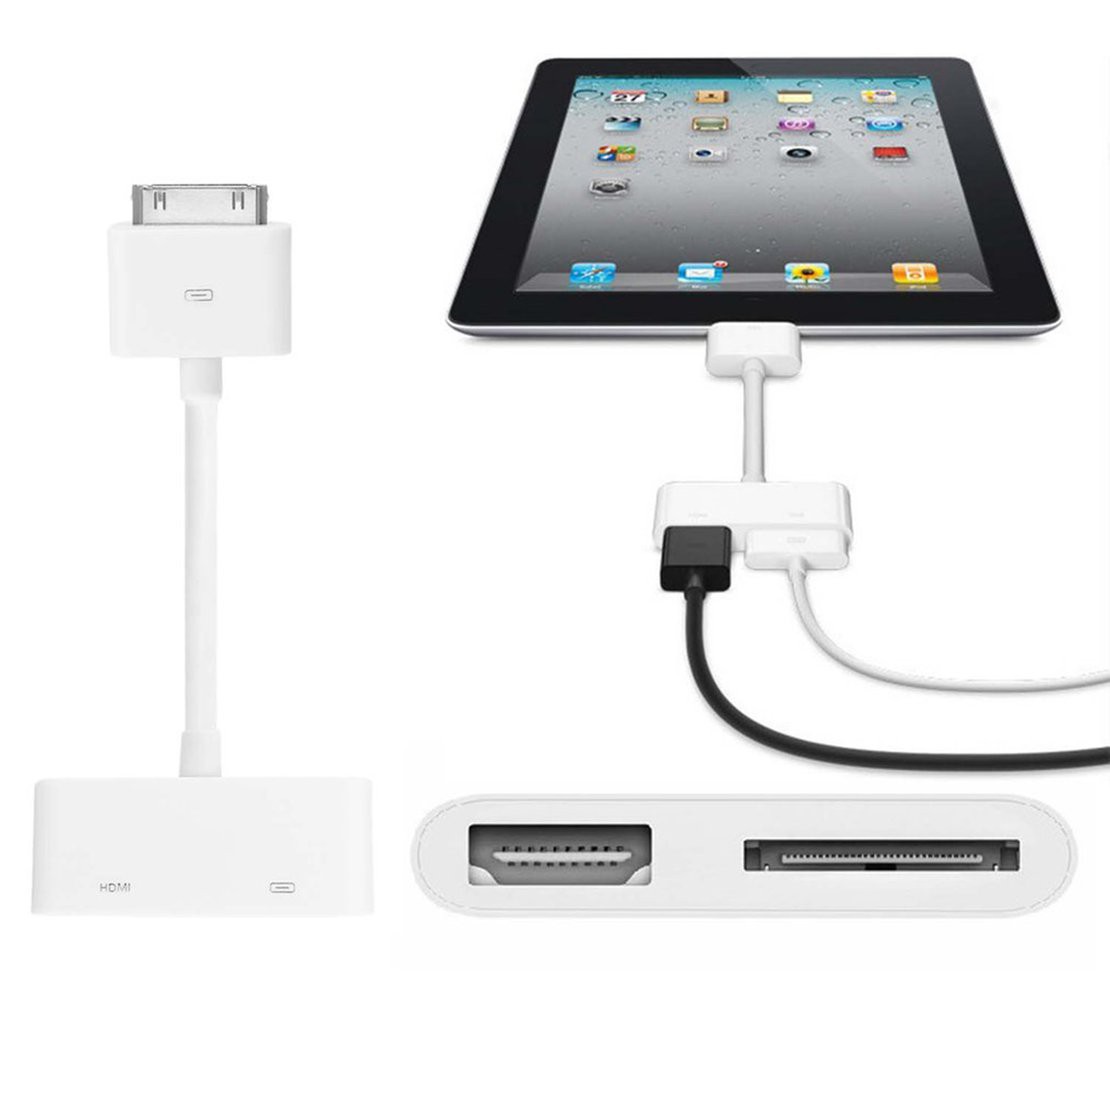 99for Ipad1 2-3 To Hdmi1-32447 Iphone4S36716 Hdmi + 30pin 25509 21475av-32447